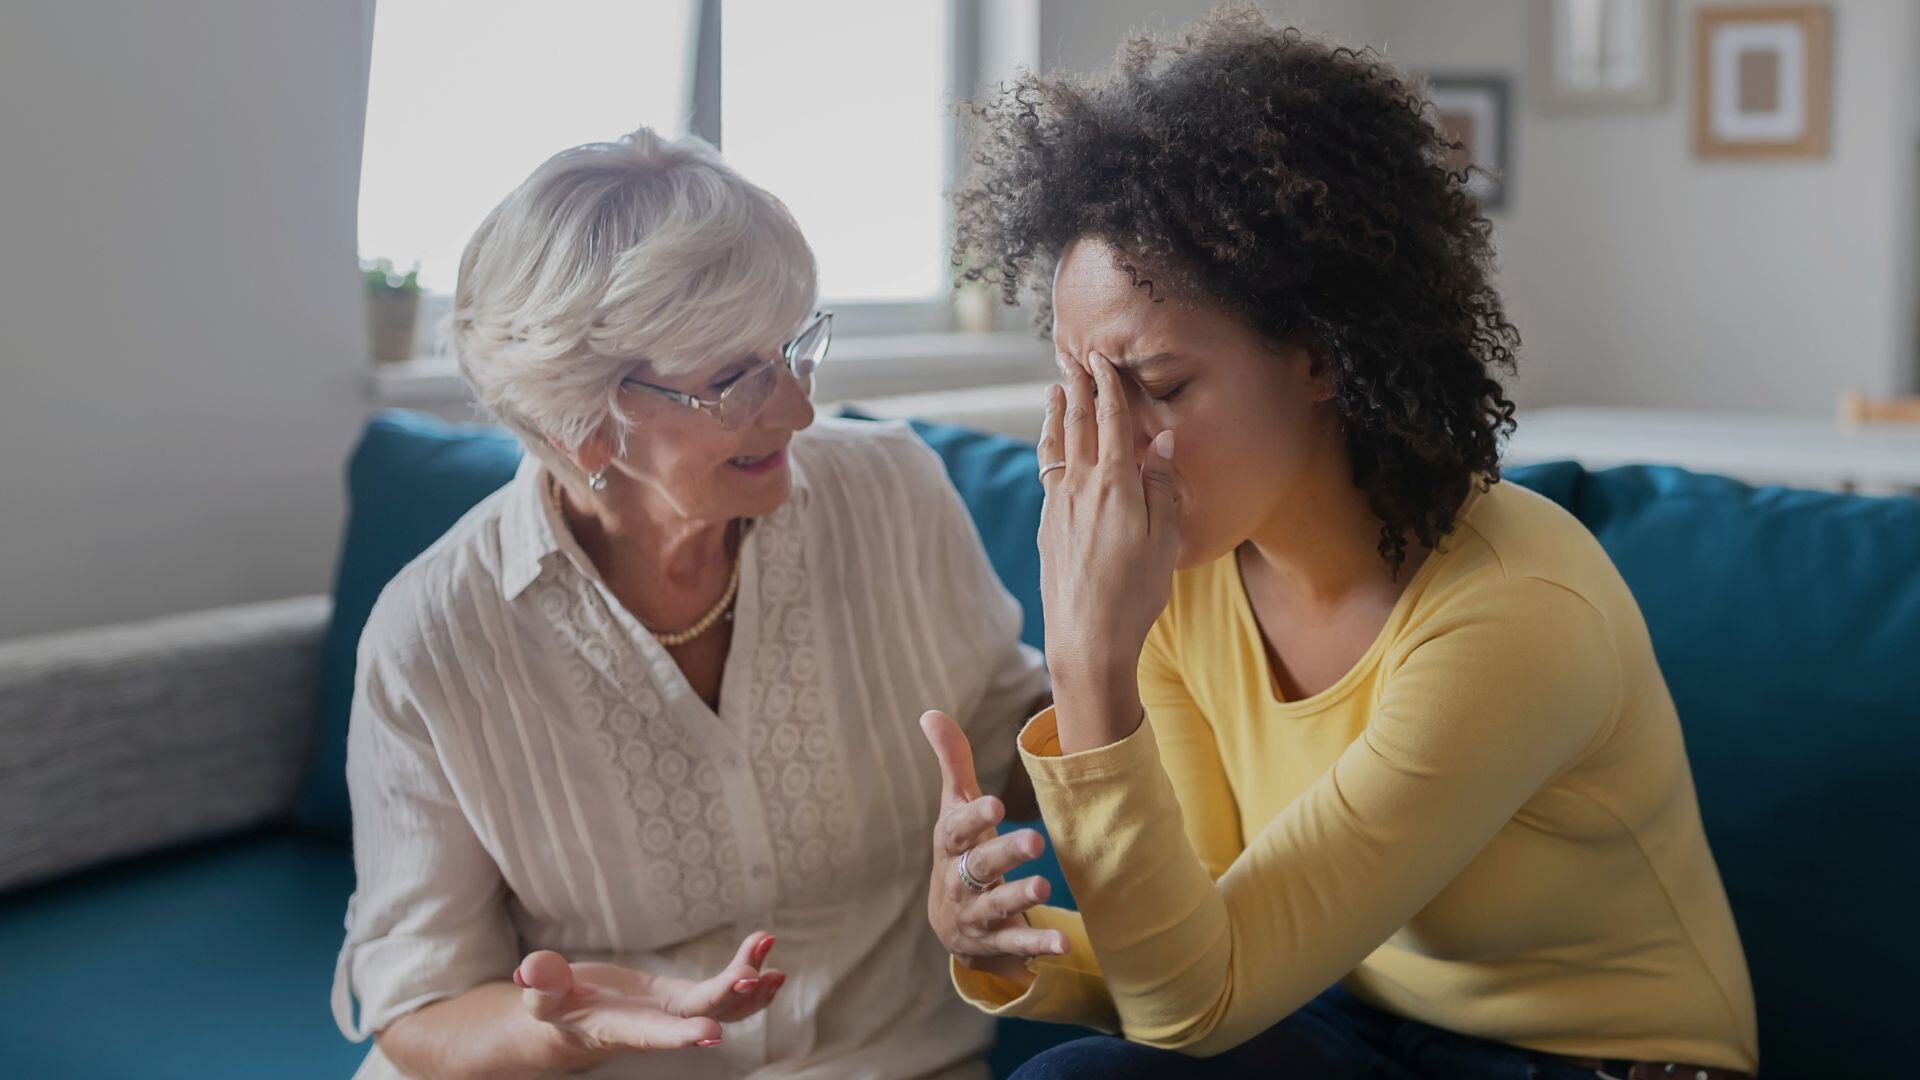 Blog: My Elderly Parents Are Doing the Wrong Thing!